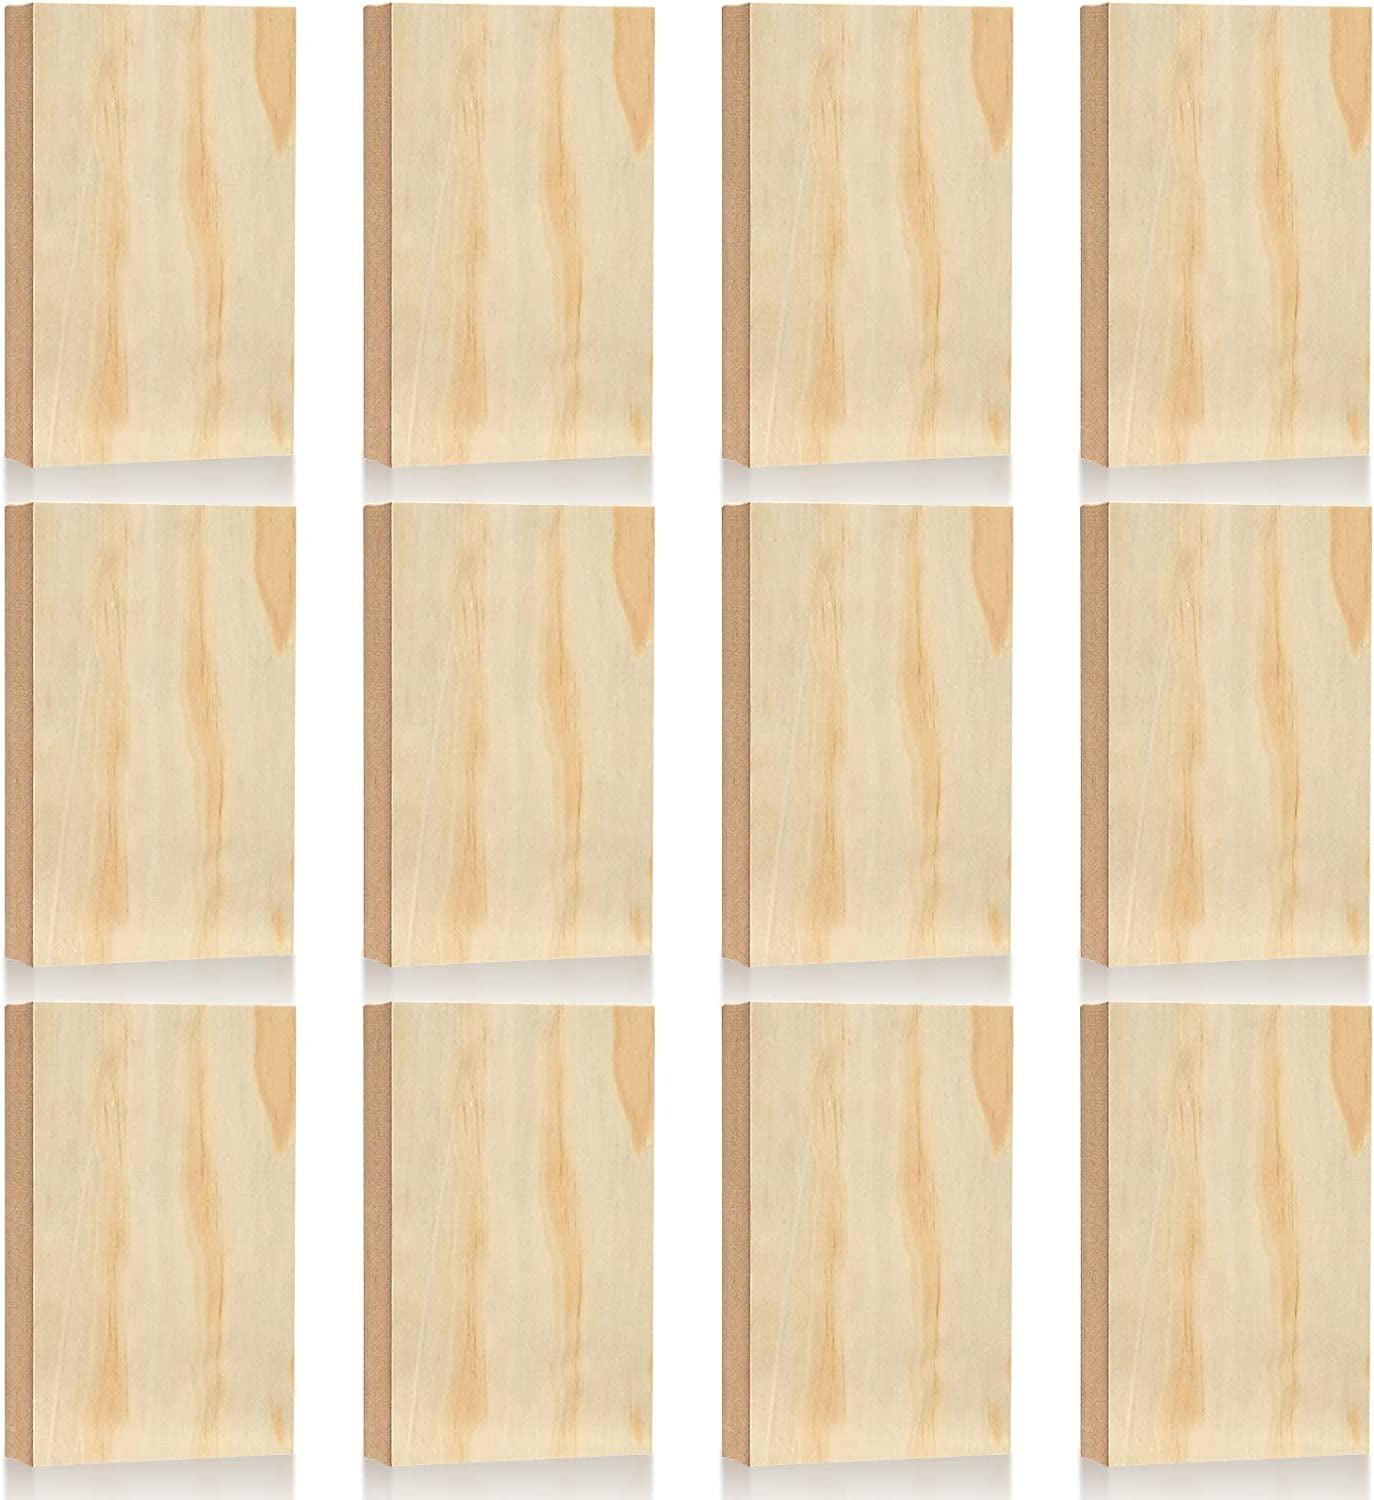 4 Pack Unfinished Wood Boards For Crafts, Painting, Wood Carving, 1 Thick Wooden  Boards For DIY Signs (3 X 10 In)